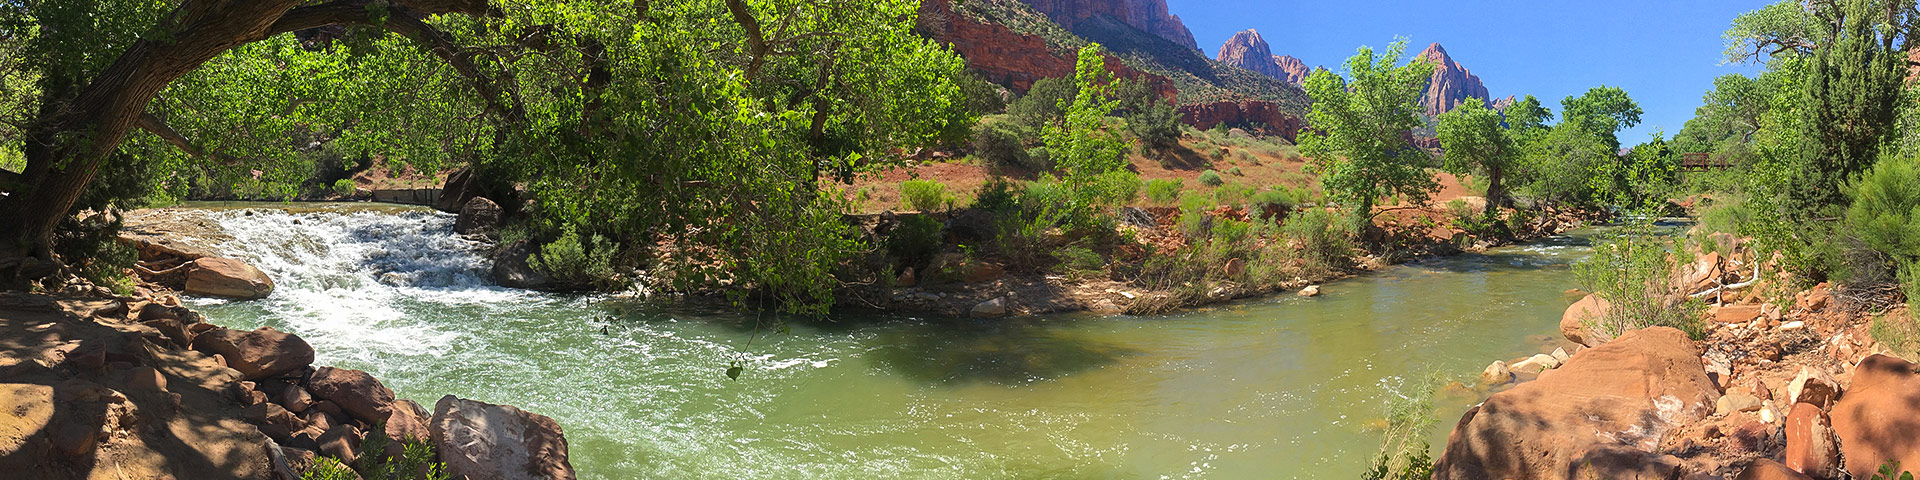 Best hikes in Zion National Park